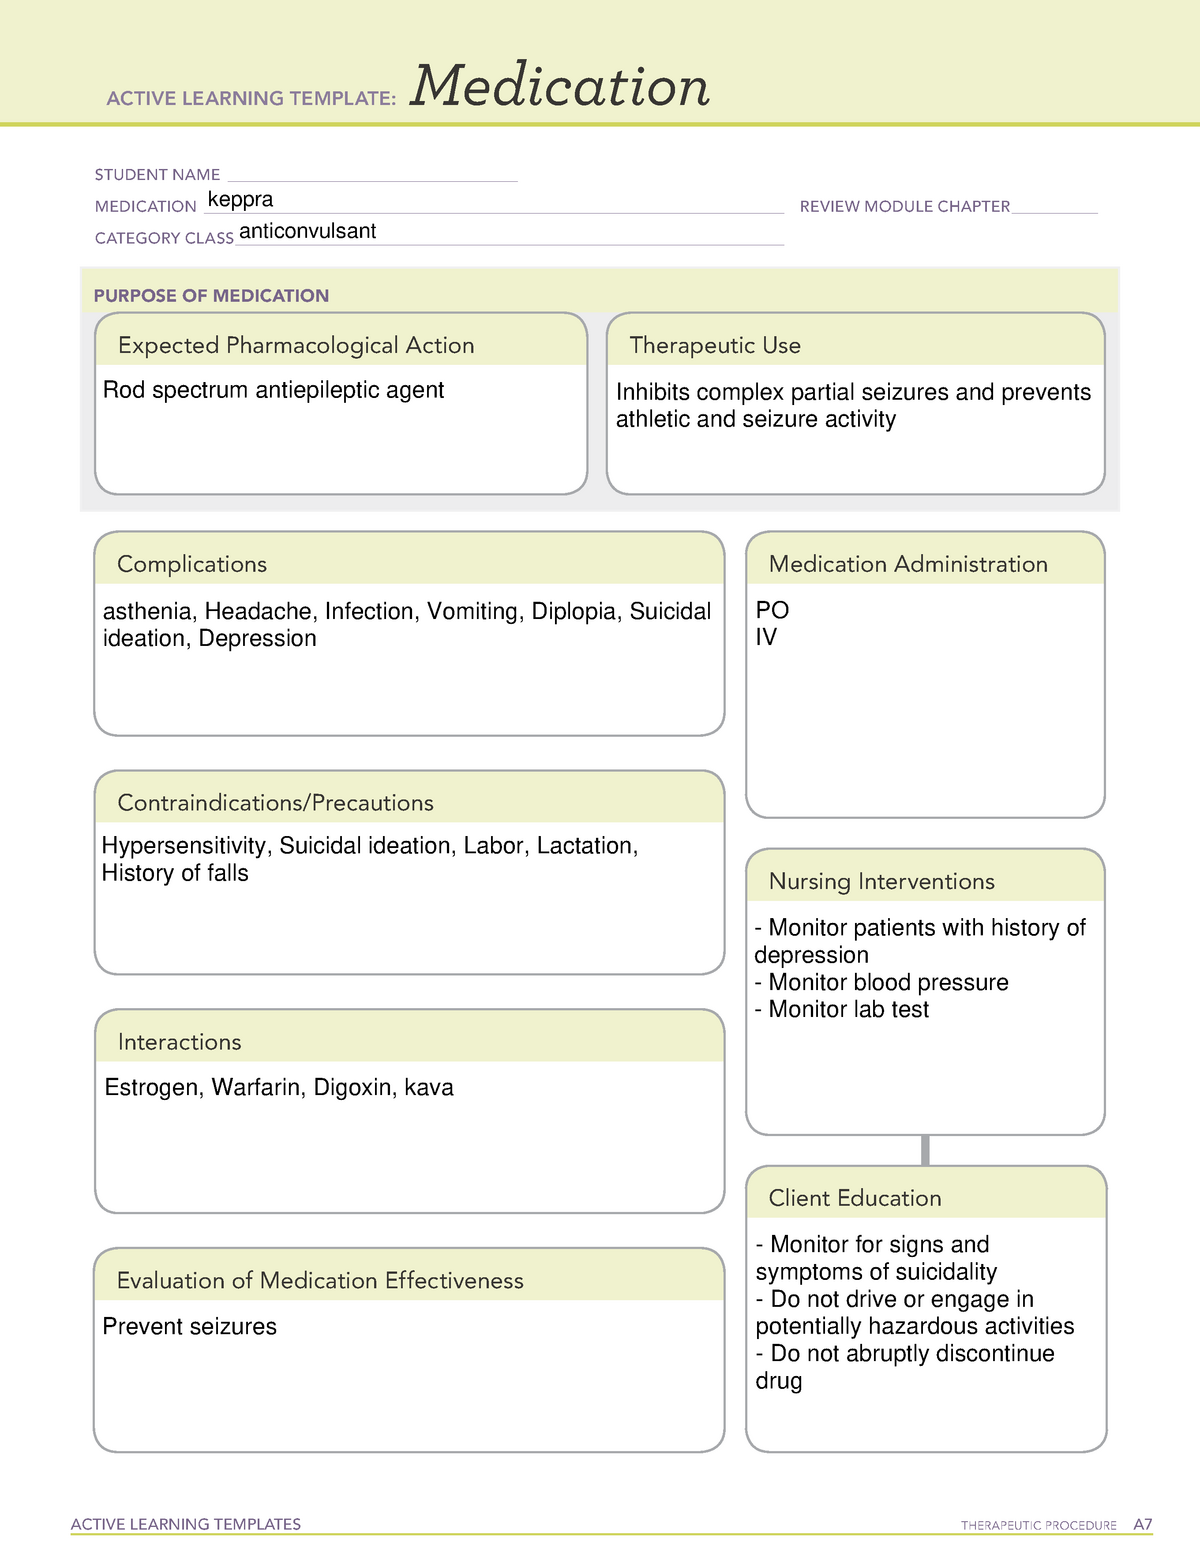 Keppra medication ATI template ACTIVE LEARNING TEMPLATES THERAPEUTIC